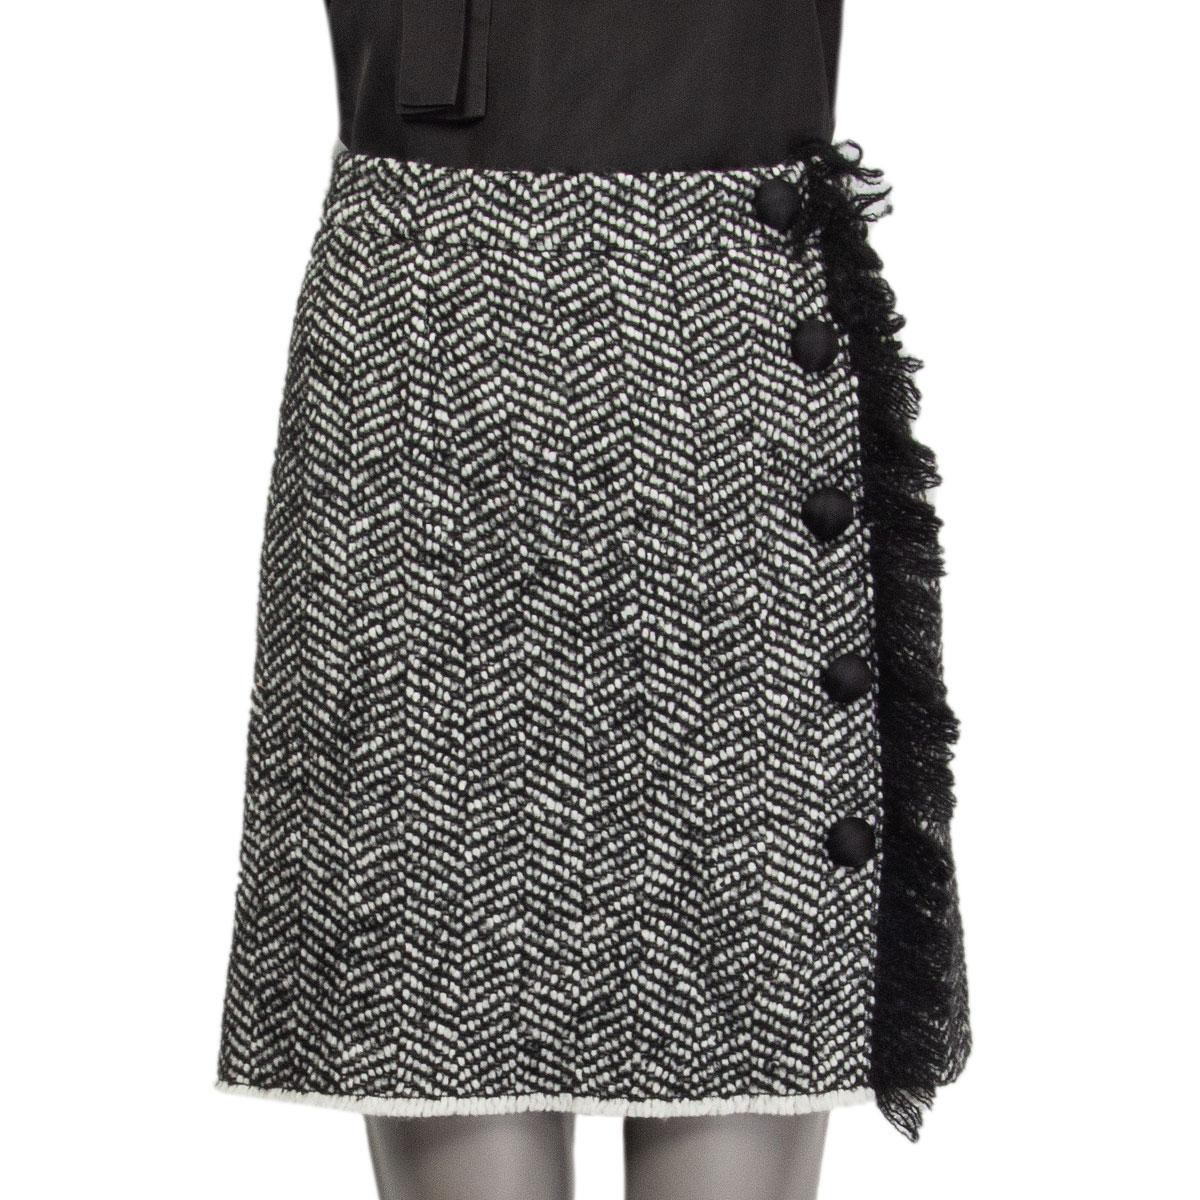 authentic Dolce&Gabbana bouclé A-line skirt in black&white wool (41%), acrylic (33%), polyester (13%), alpaca (10%) and polyamide (3%) with buttons and a wool fringe embellishment on the front. Closes with two buttons and a zip on the back. Lined in